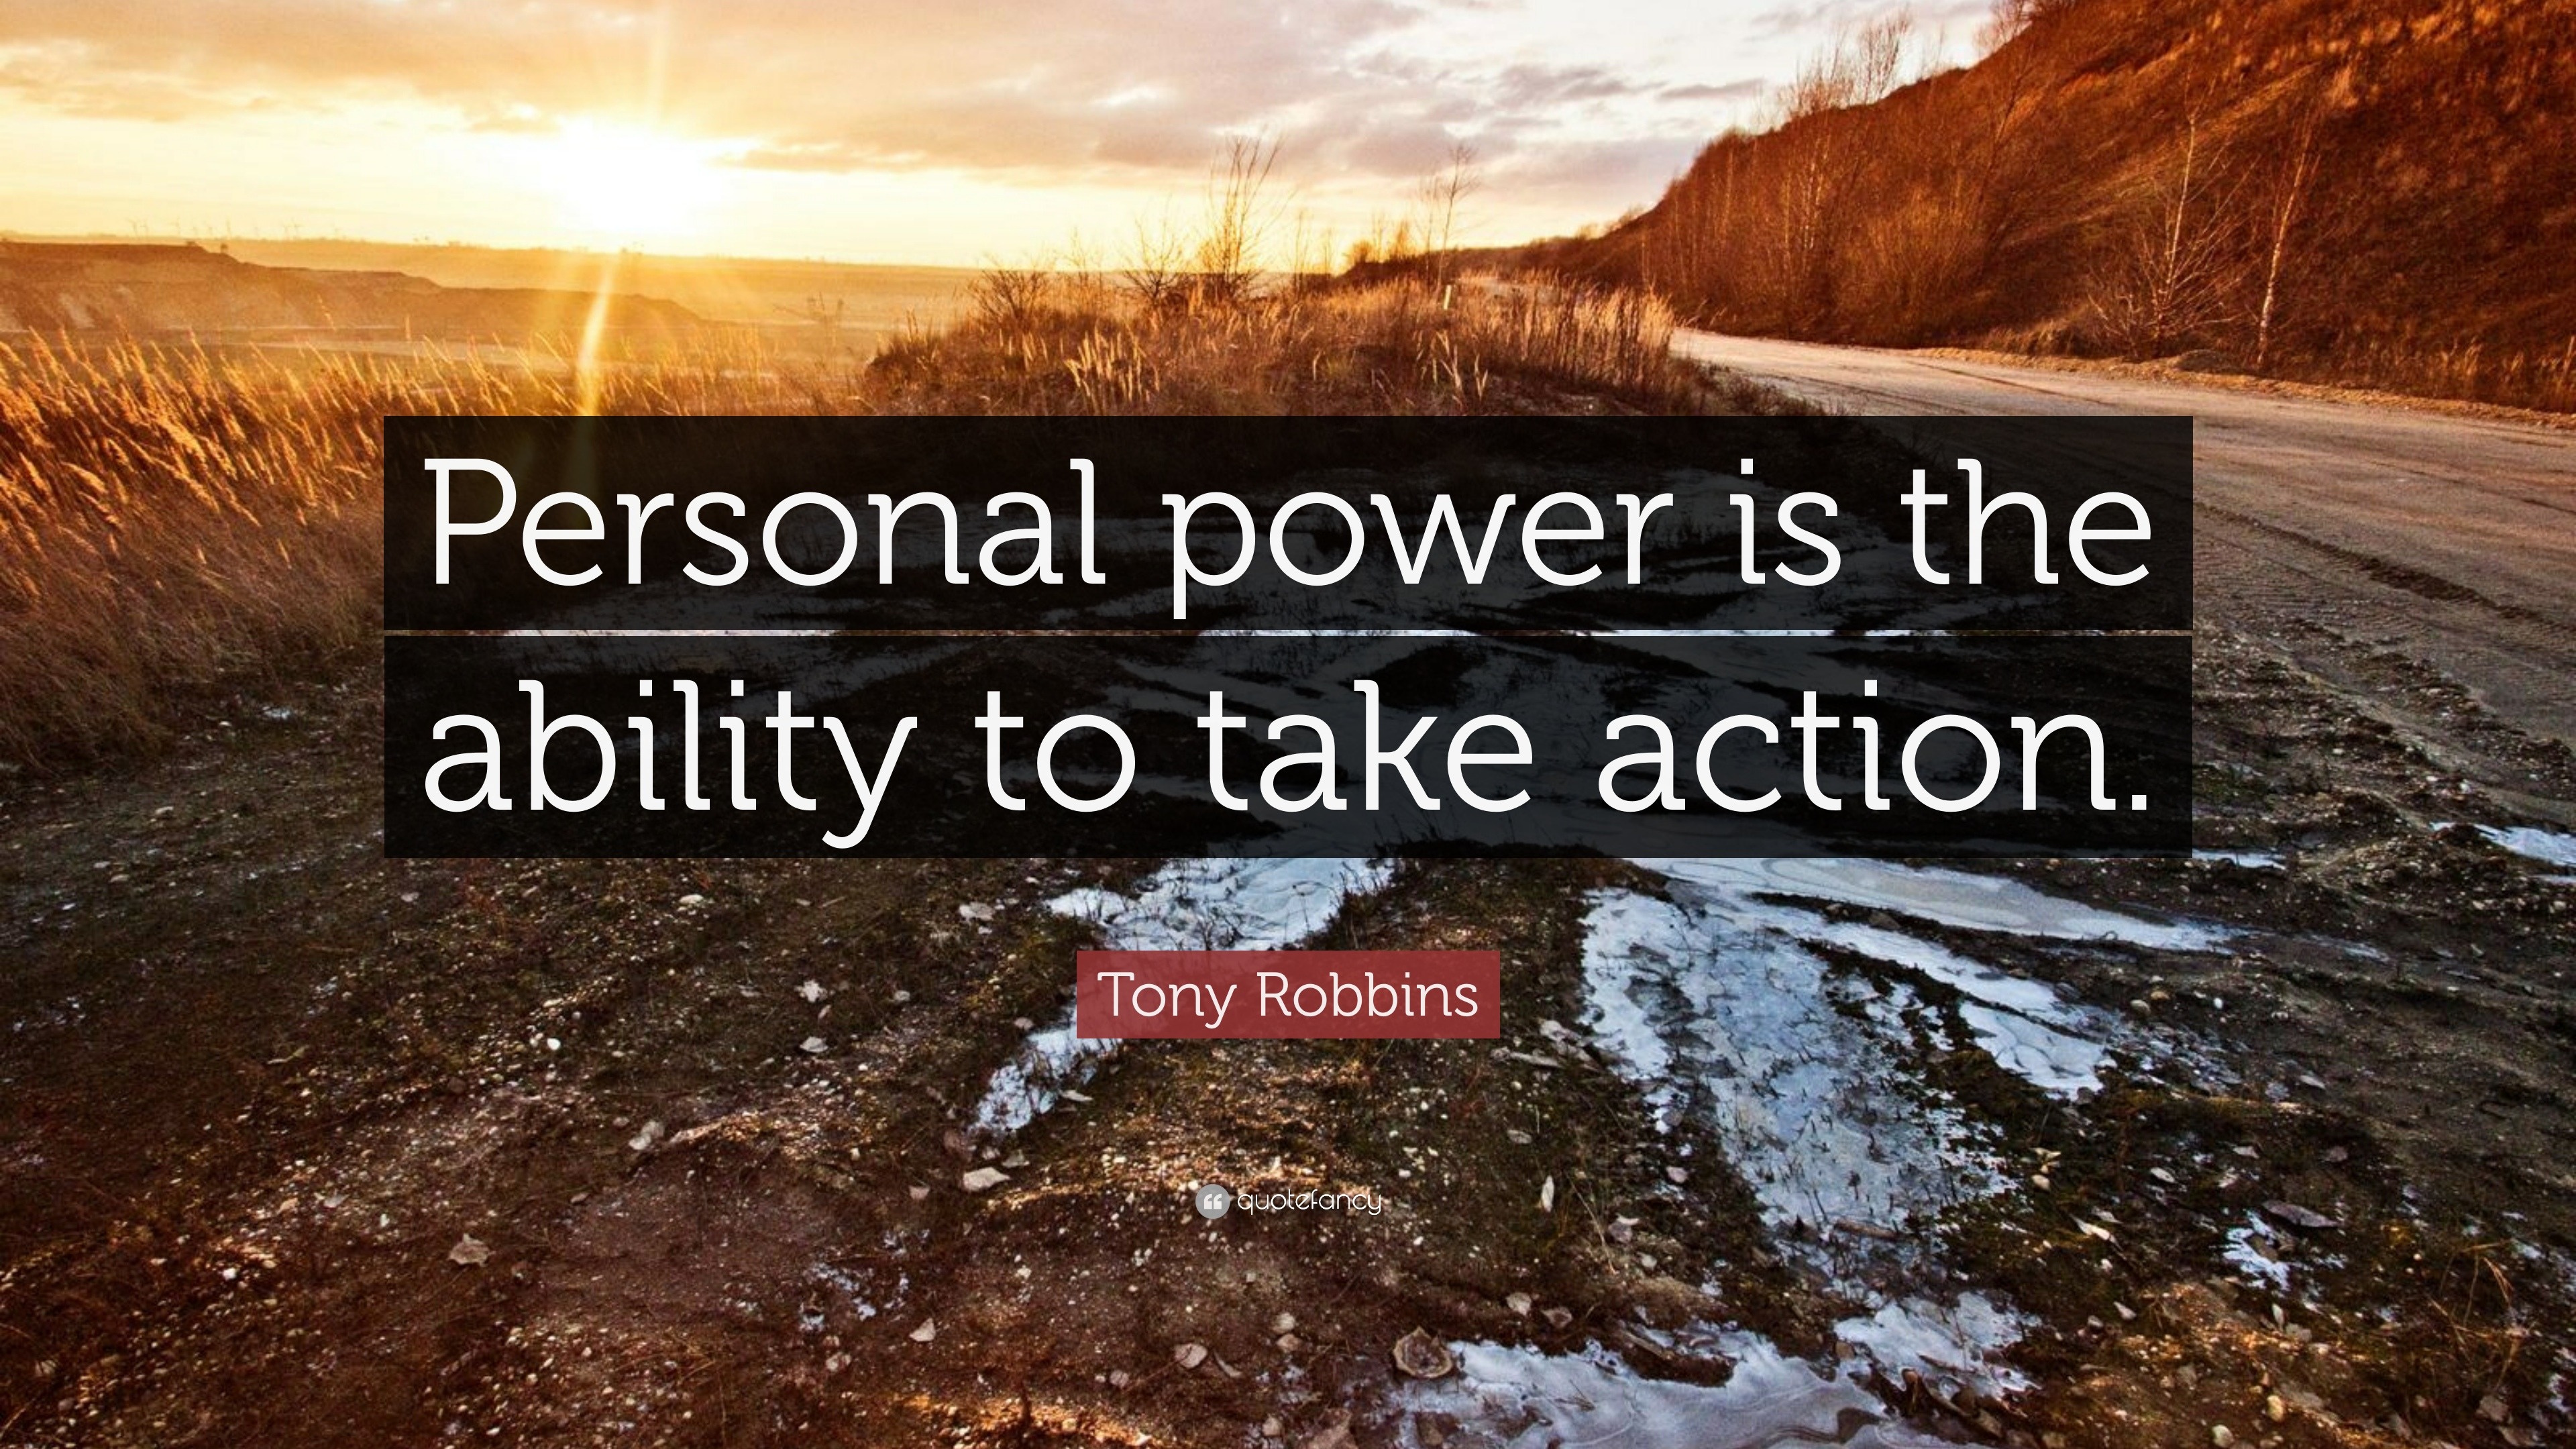 https://quotefancy.com/media/wallpaper/3840x2160/1735765-Tony-Robbins-Quote-Personal-power-is-the-ability-to-take-action.jpg